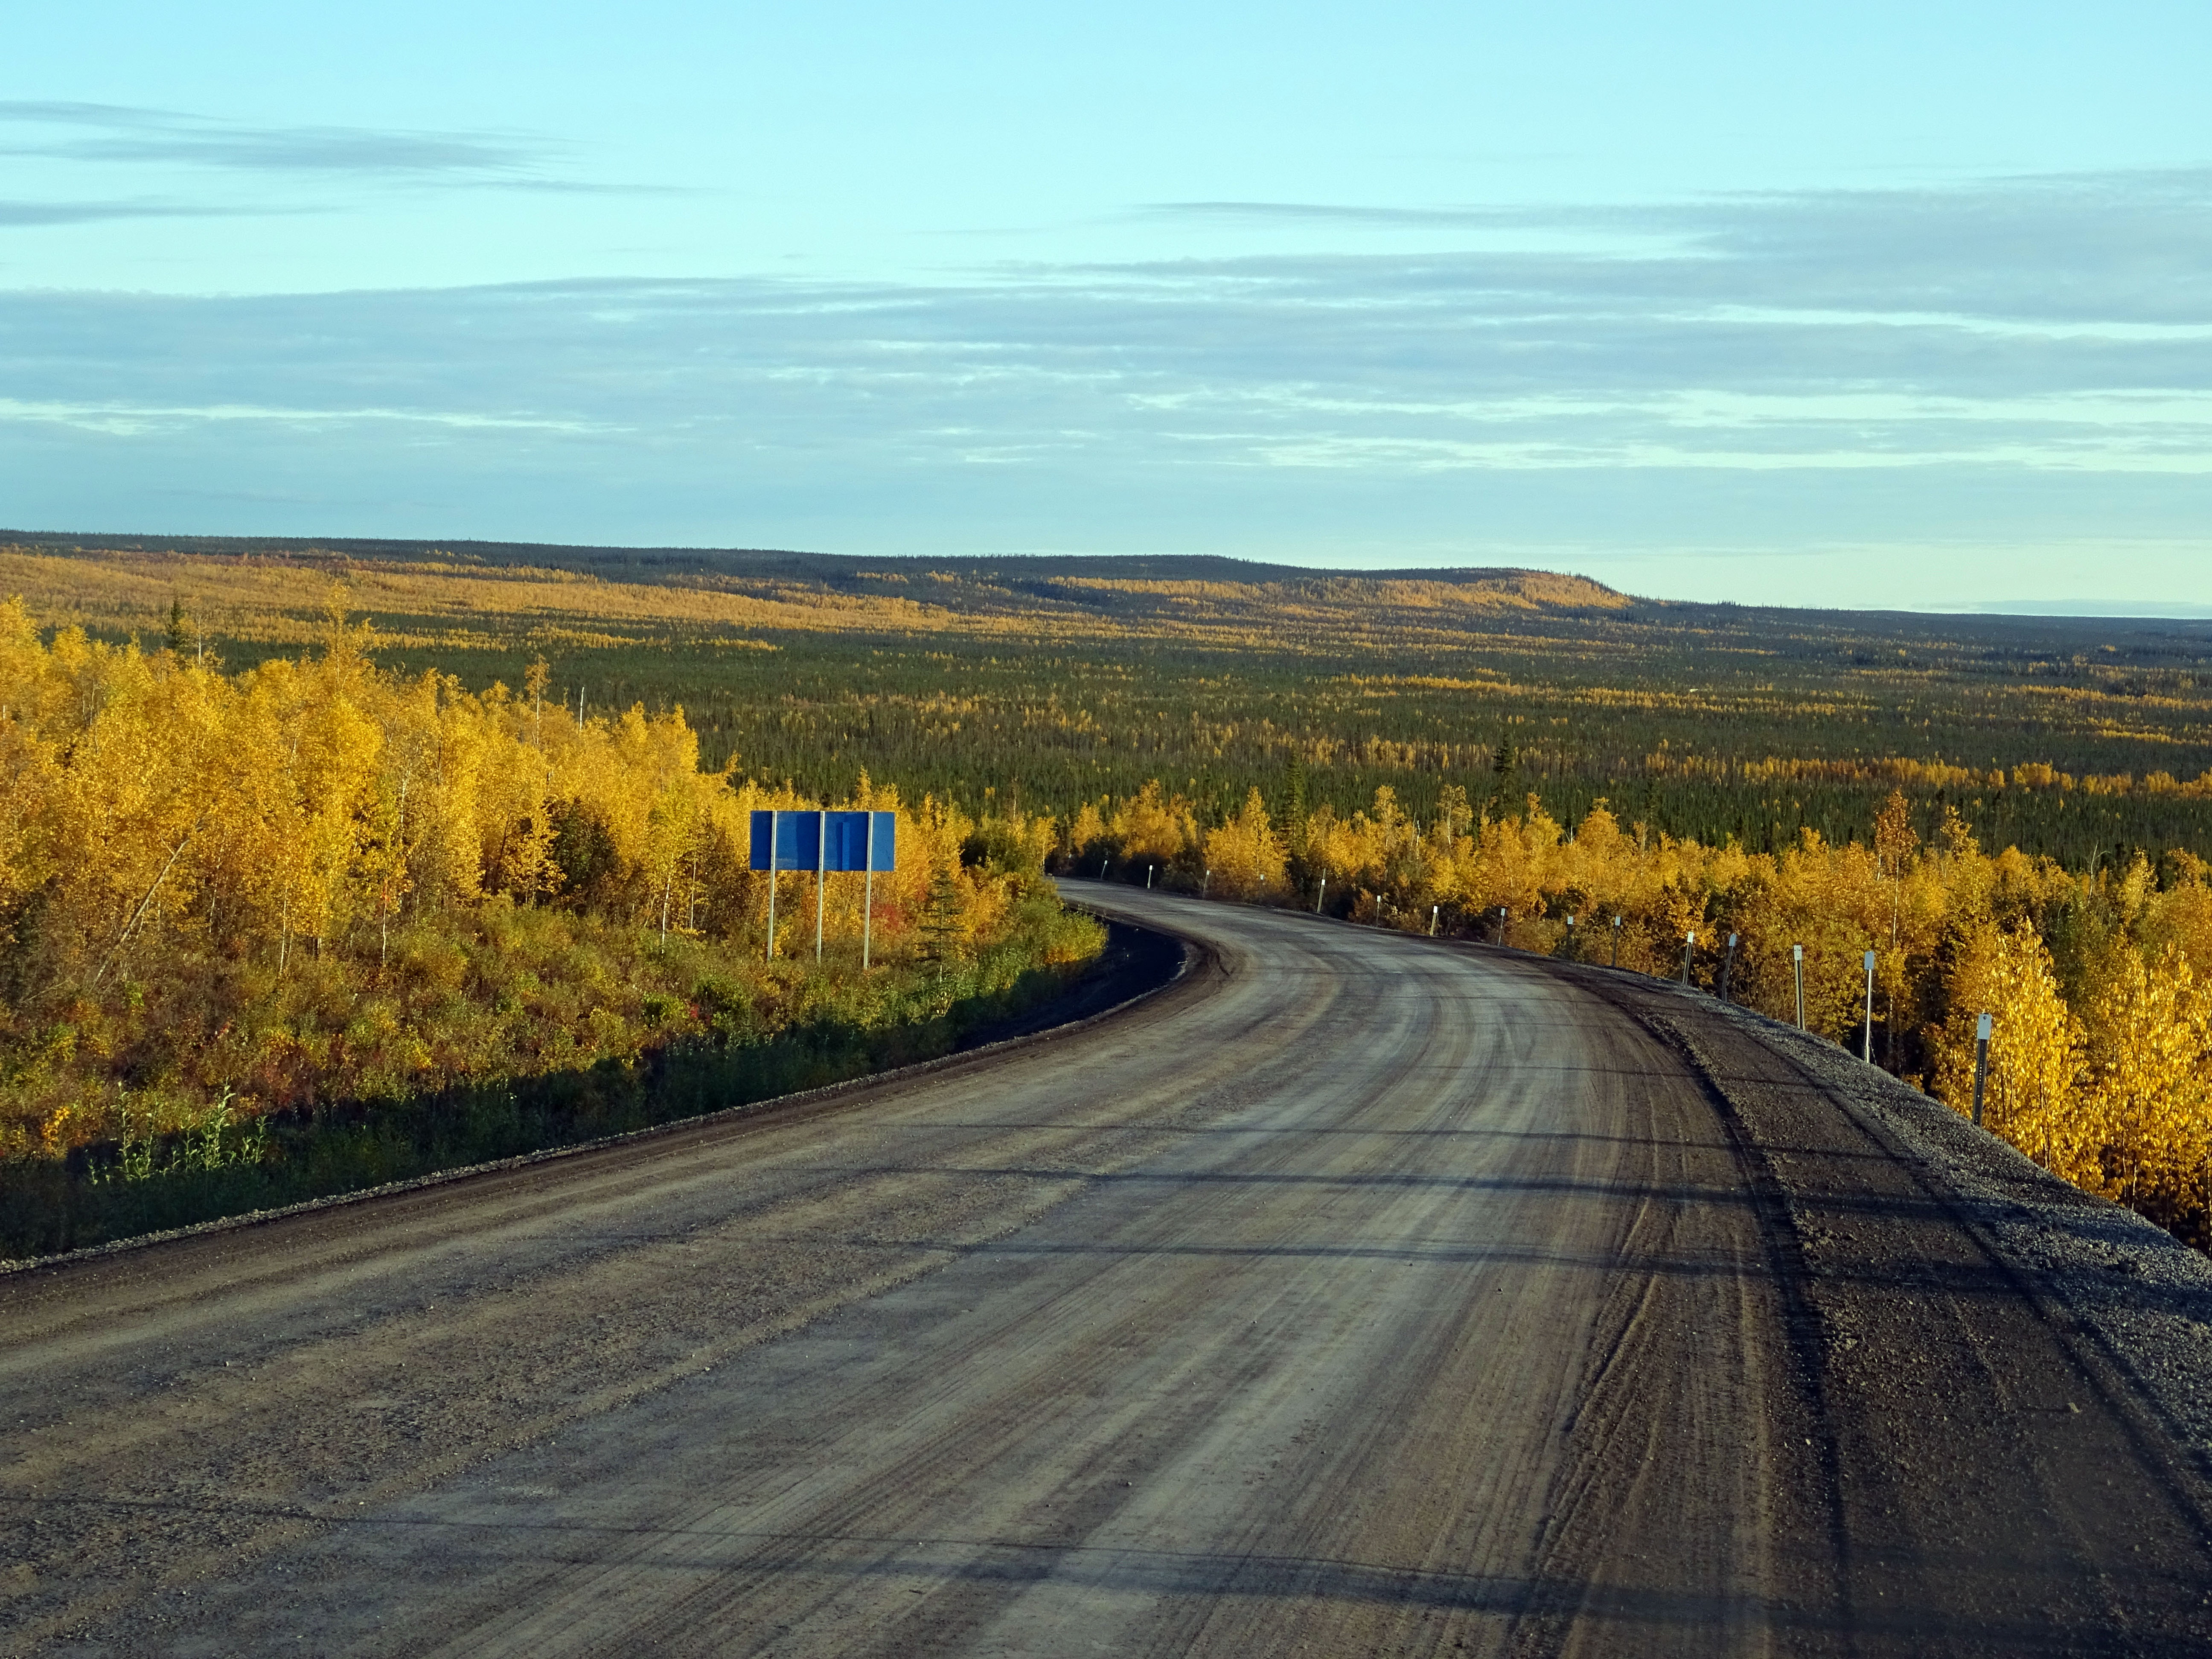 Dempster Highway, Canada